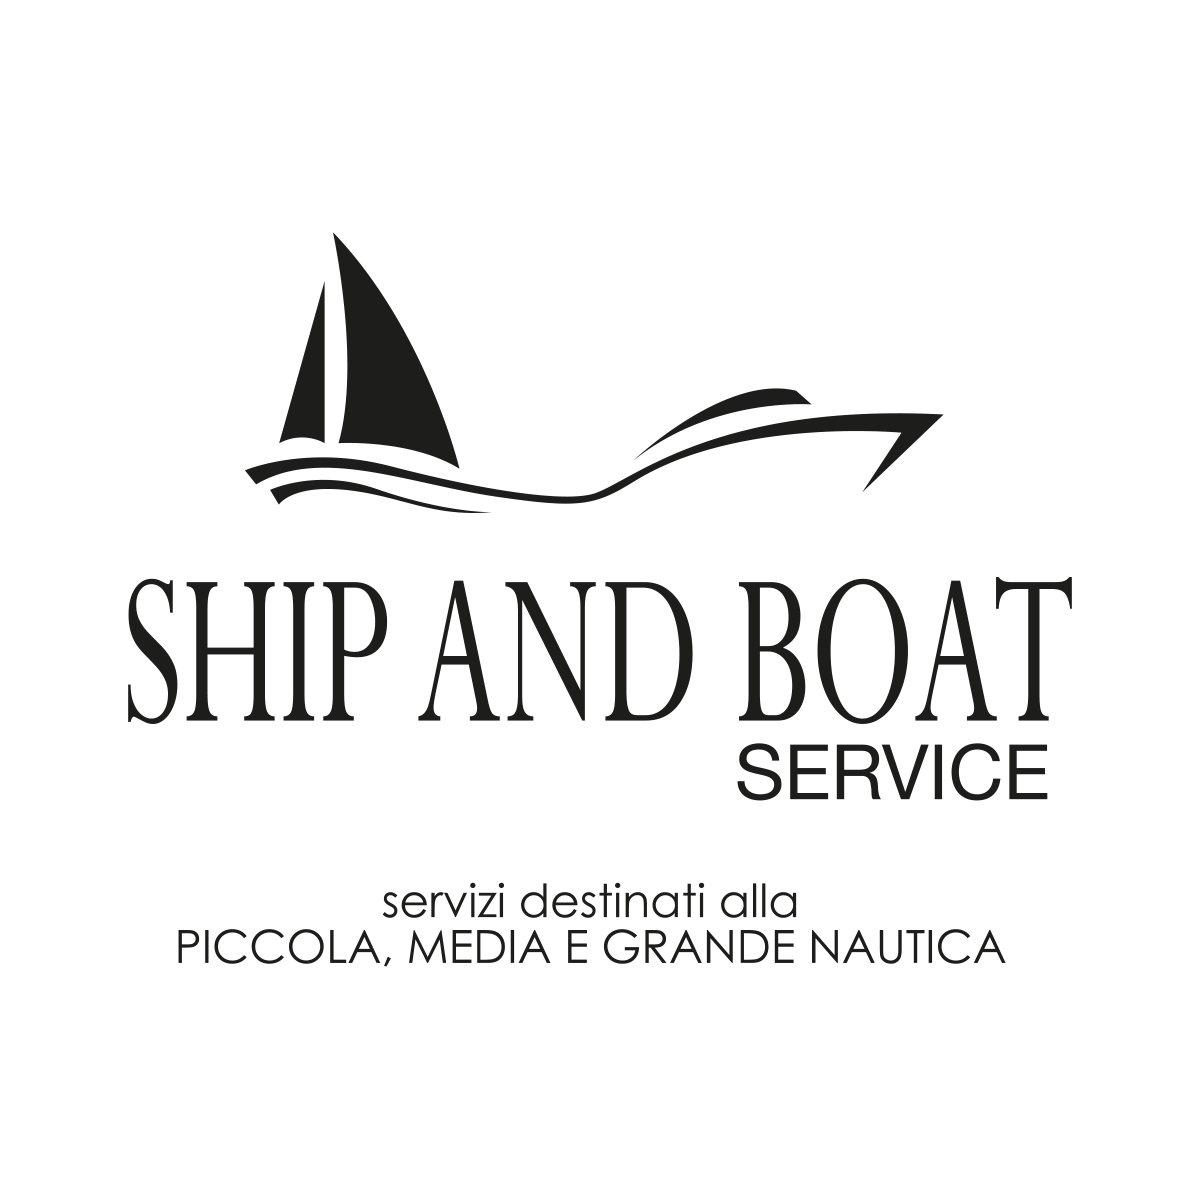 SHIP AND BOAT SERVICE